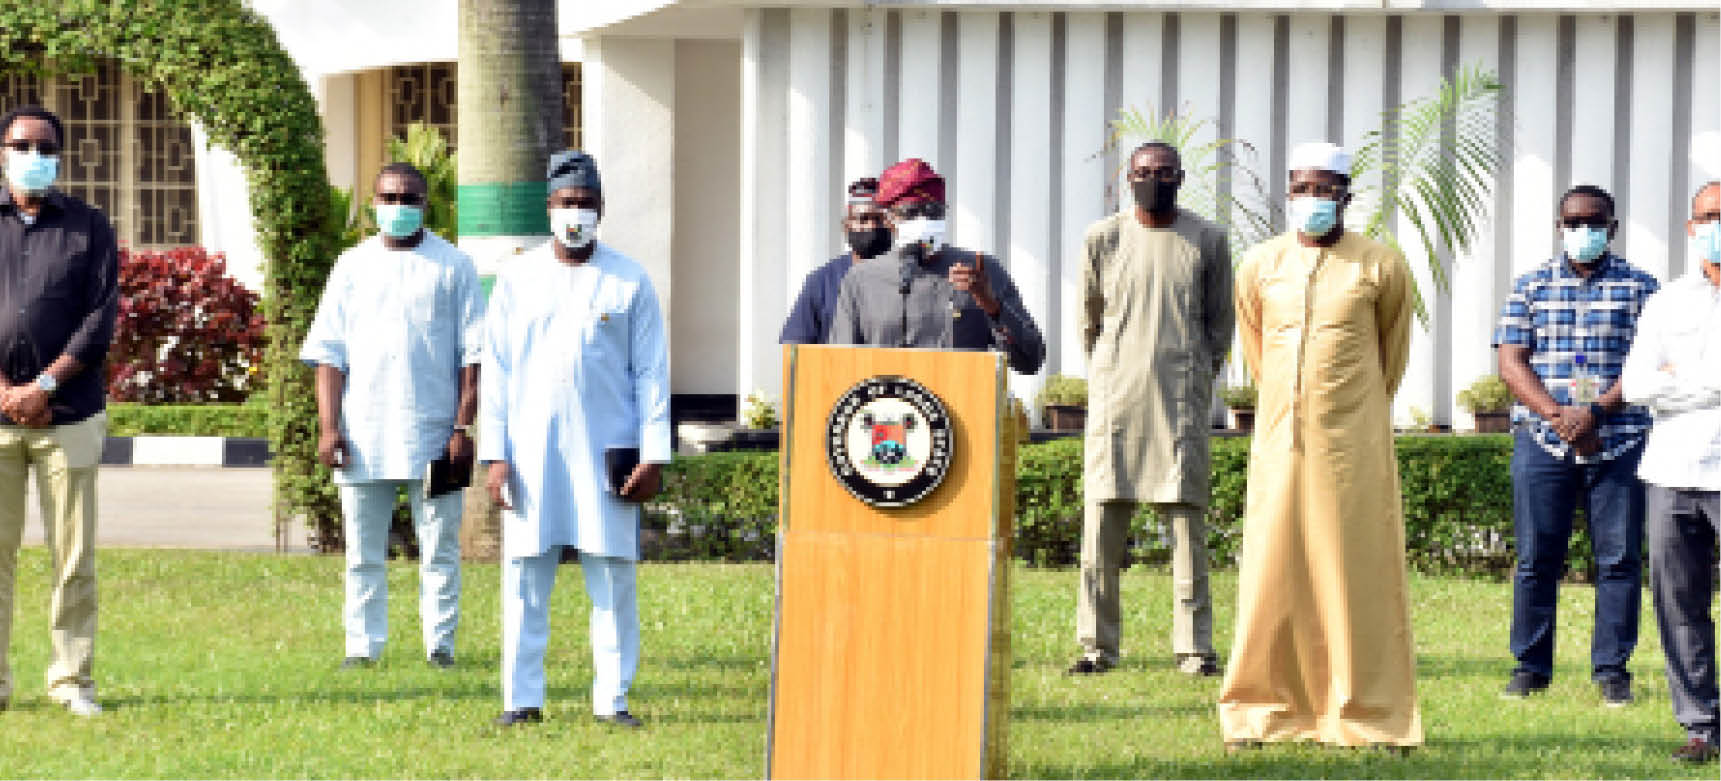 From left: Lagos state Commissioner for Justice/Attorney-General, Mr Moyosore Onigbanjo; Deputy Governor of Lagos state, Dr Obafemi Hamzat; Gov. Babajide Sanwo-Olu; Head of Service, Mr Hakeem Murk-Okunola; and Commissioner for Health, Prof. Akin Abayomi, during a news conference on the update of the COVID-19 pandemic in the state and opening of the worship centre in the state in Lagos at the weekend Photo: NAN